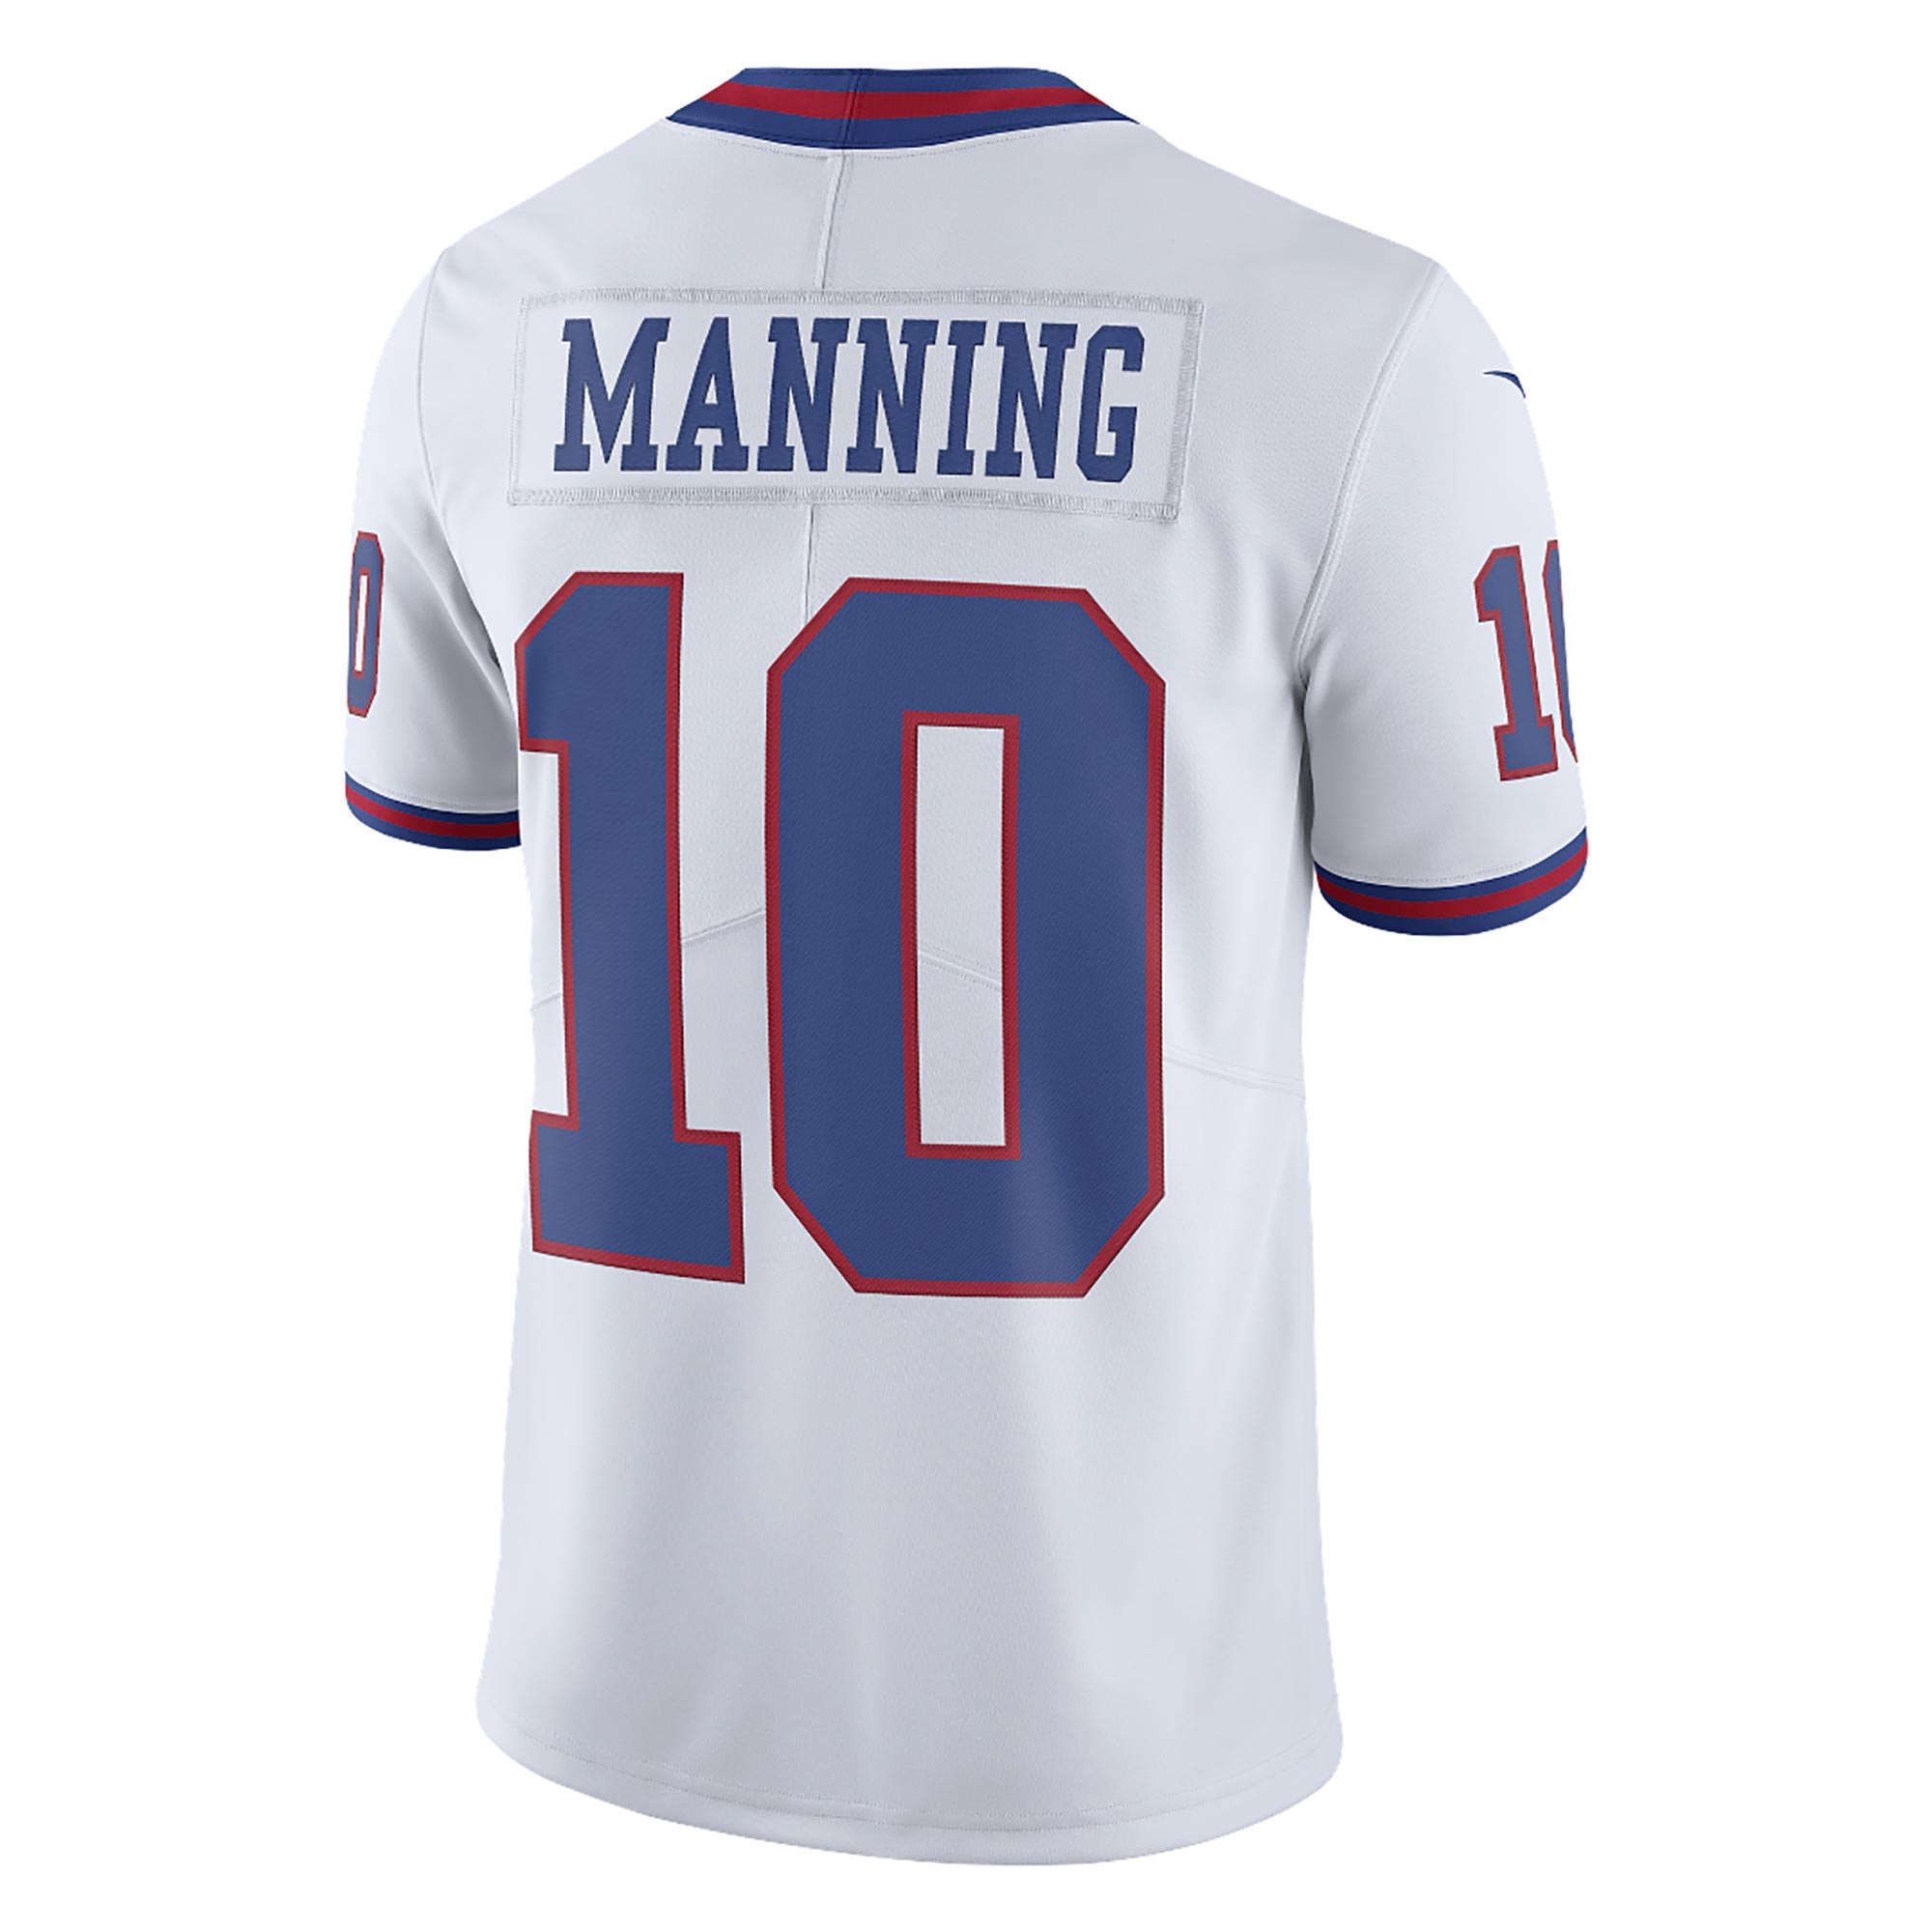 eli manning color rush jersey